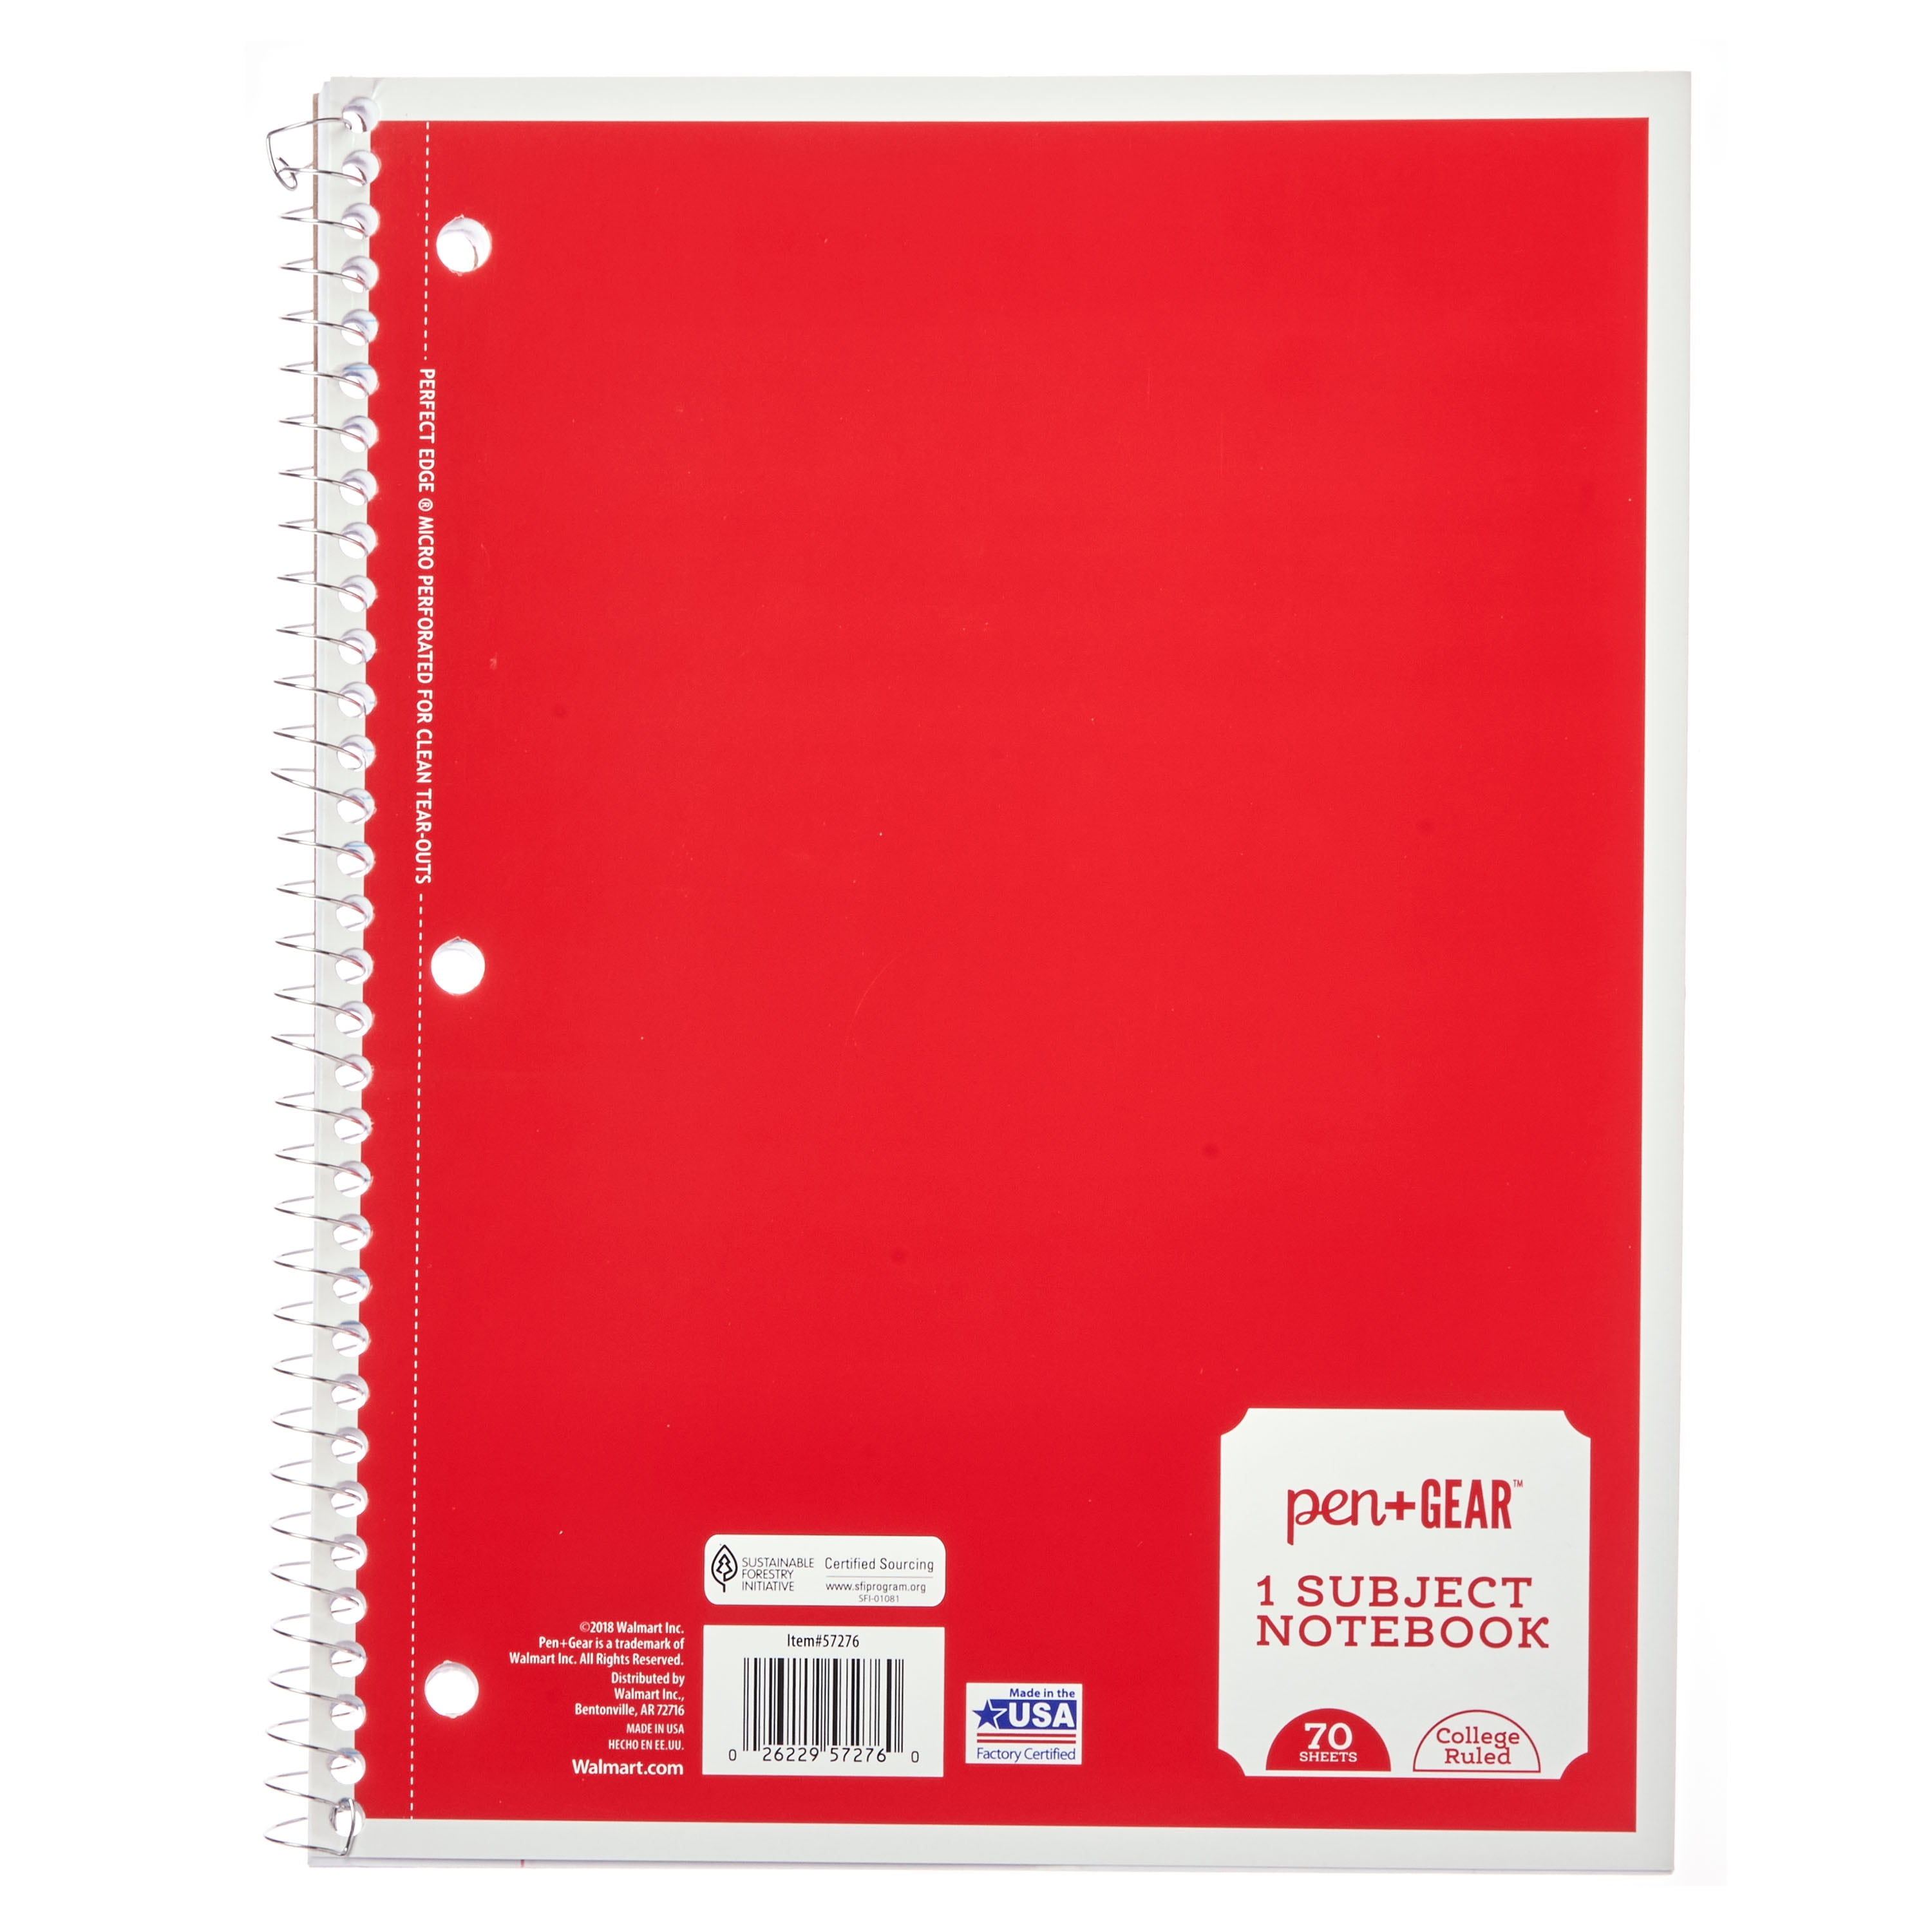 Pen+Gear Pen + Gear 1-Subject Spiral Notebook, College Ruled, 70 Pages, Red